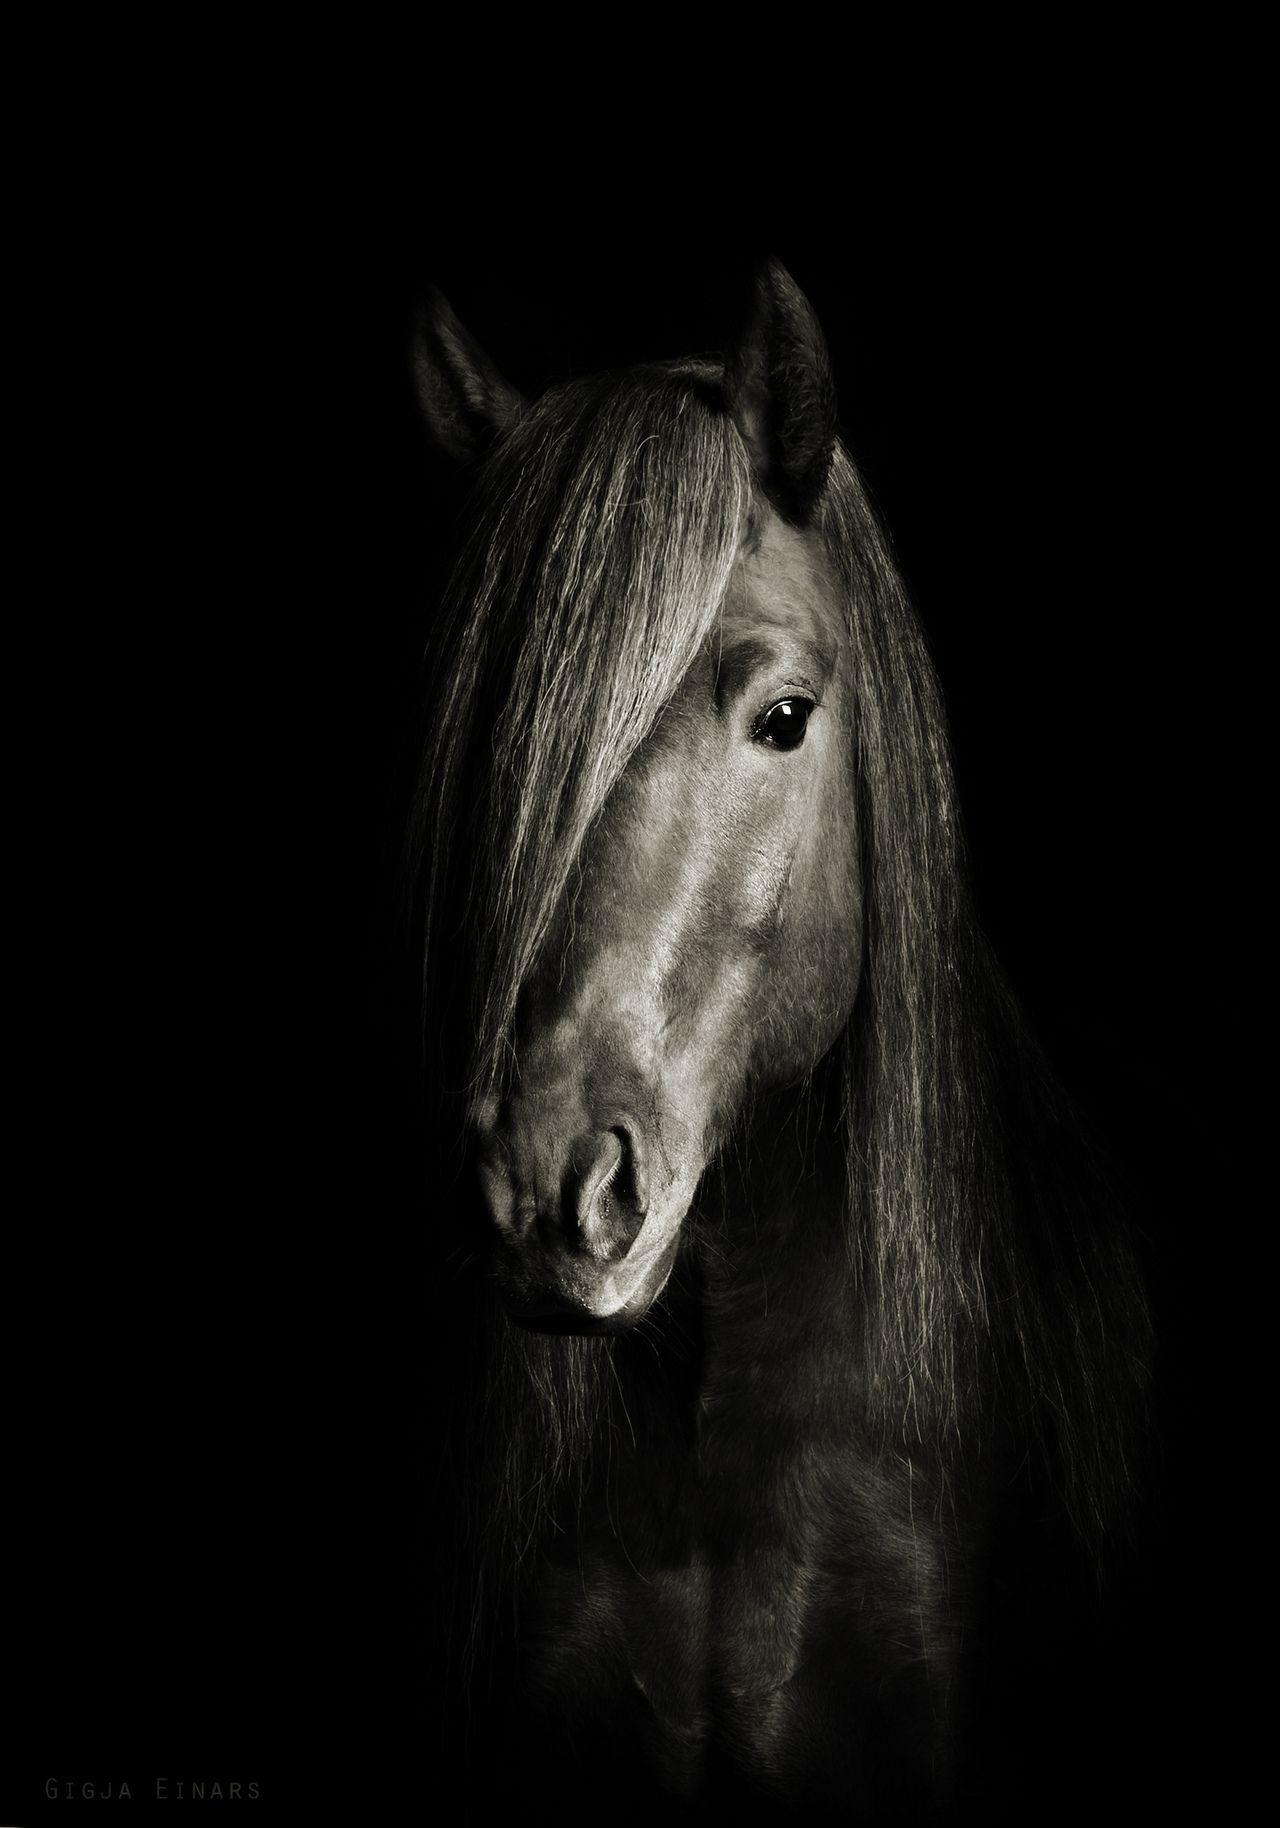 Black and White Horse Wallpapers Top Free Black and White Horse